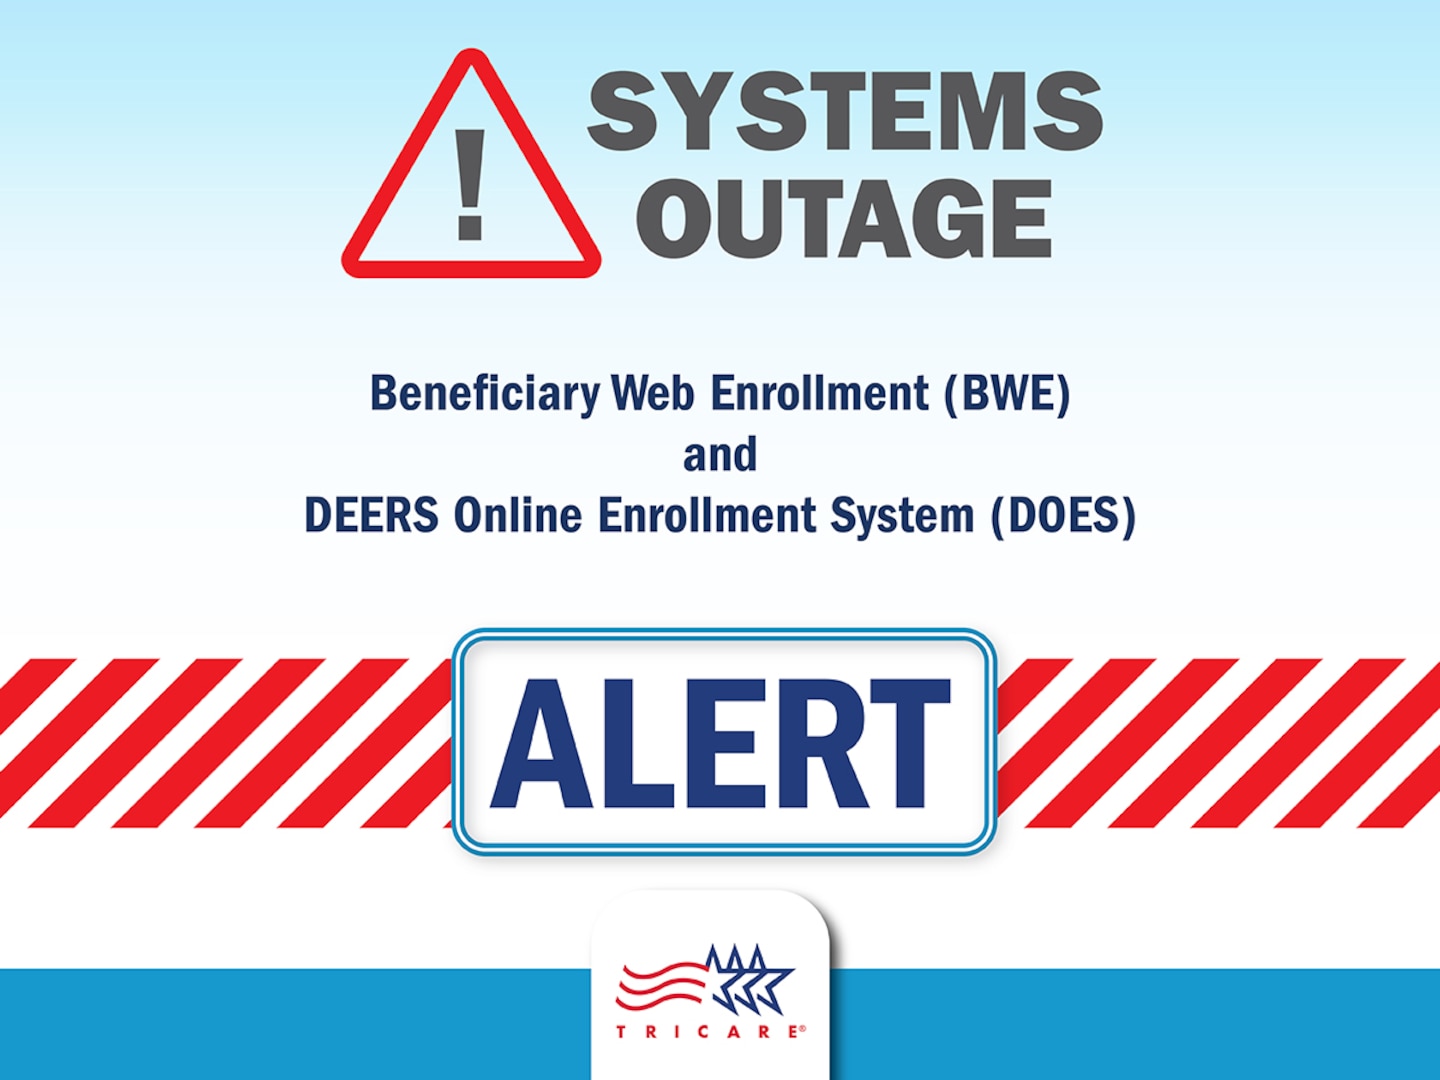 Alert: DEERS and BWE outage